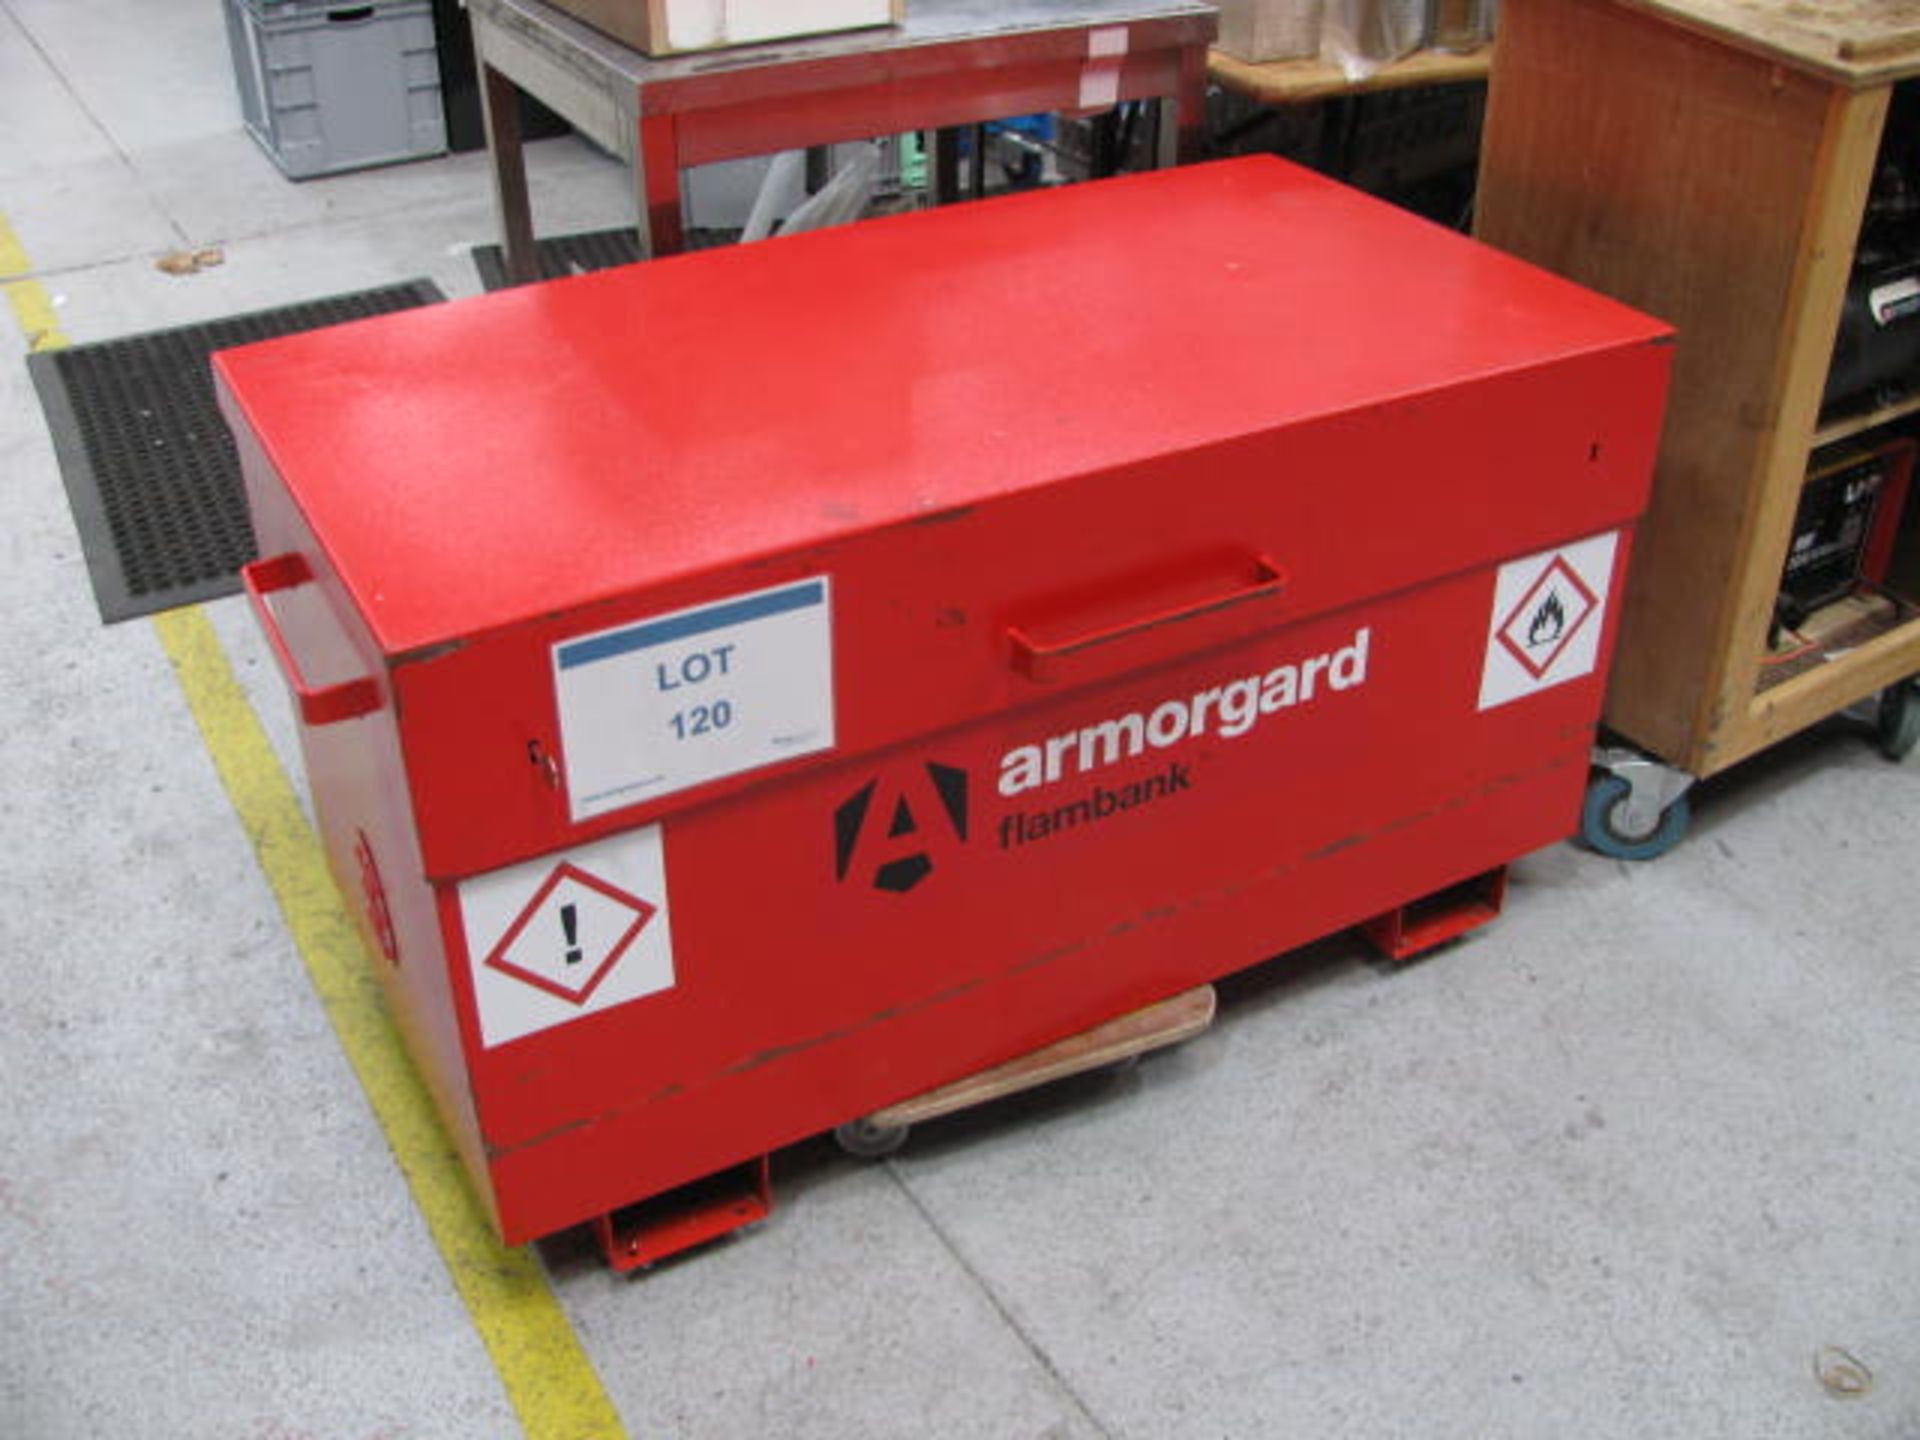 Armorgard flame proof site safe - Image 2 of 3